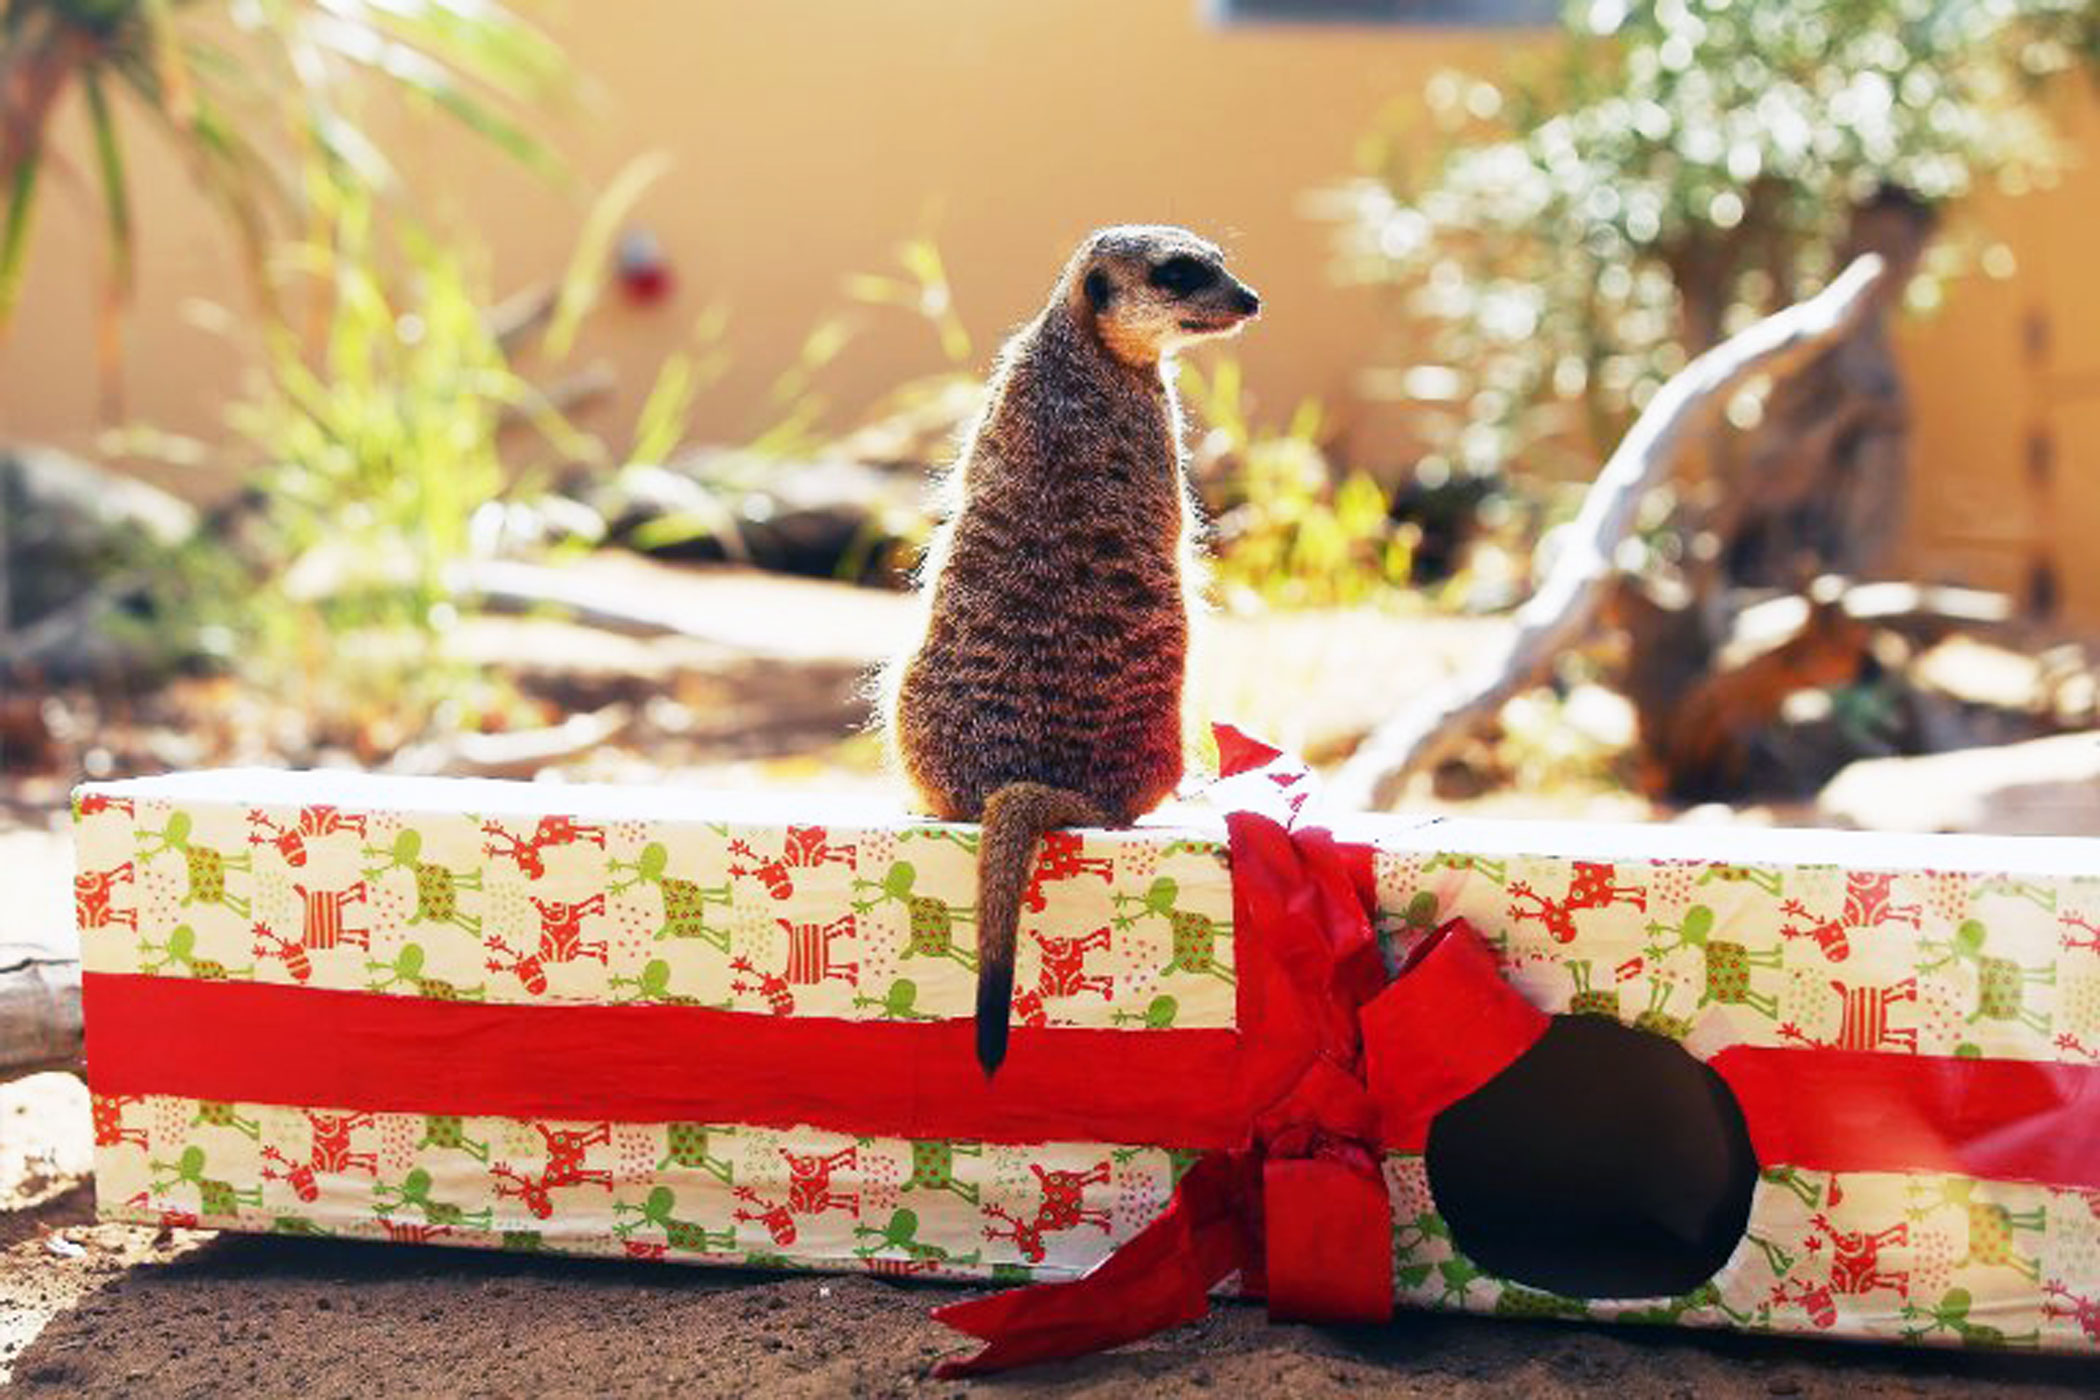 A Meerkat plays at Taronga Zoo, where the animals were given Christmas-themed enrichment treats and puzzles on Dec. 4, 2015 in Sydney.